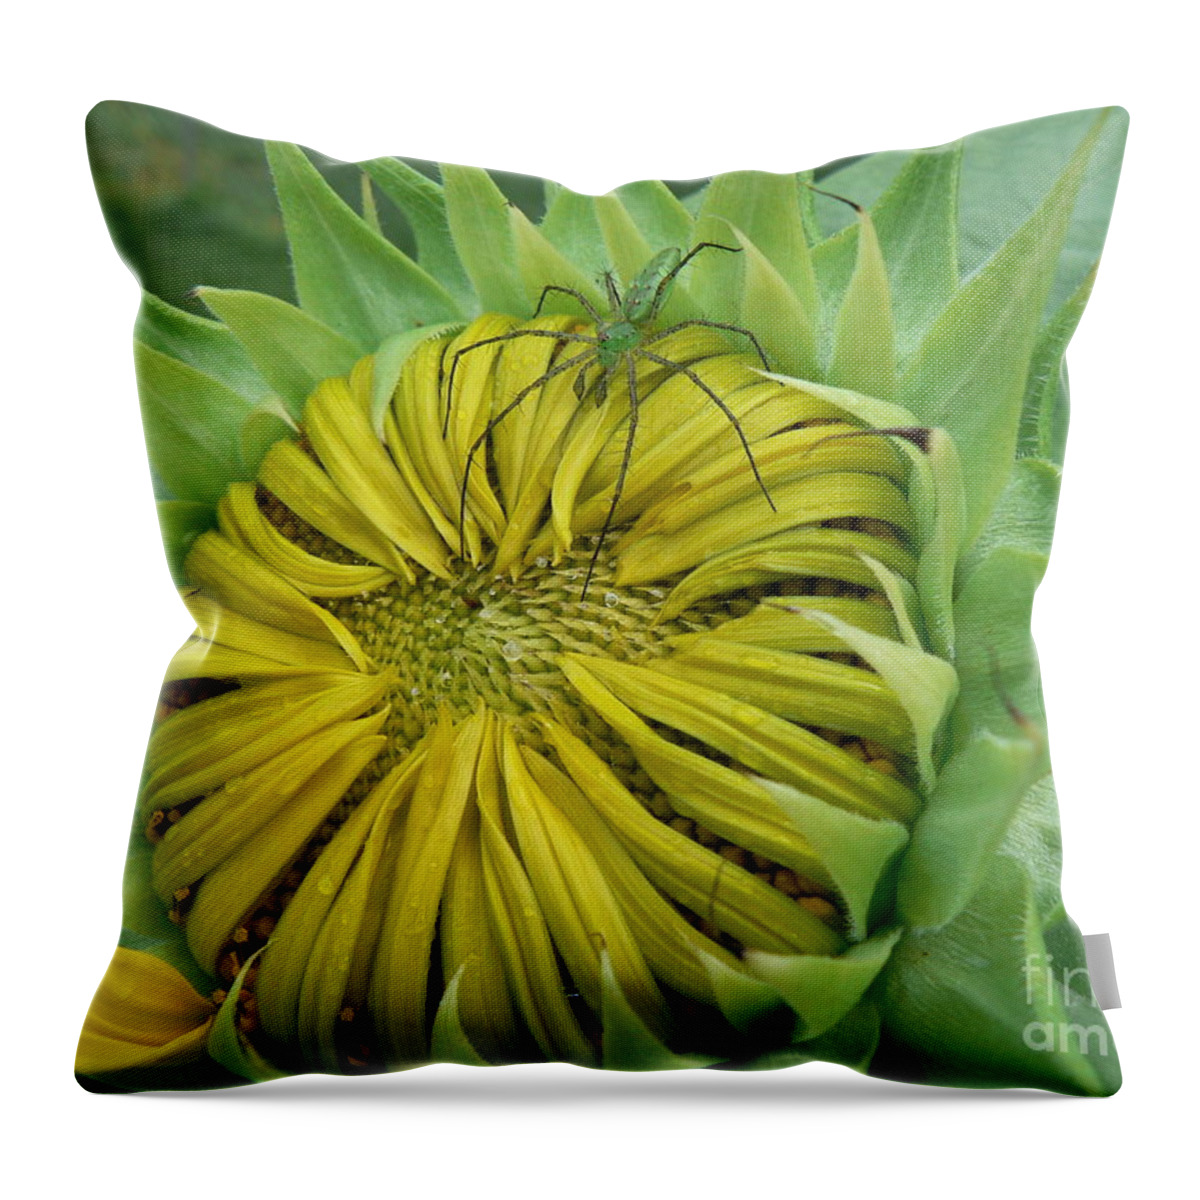 Spider Throw Pillow featuring the photograph Green Spider on a Sunflower by MM Anderson